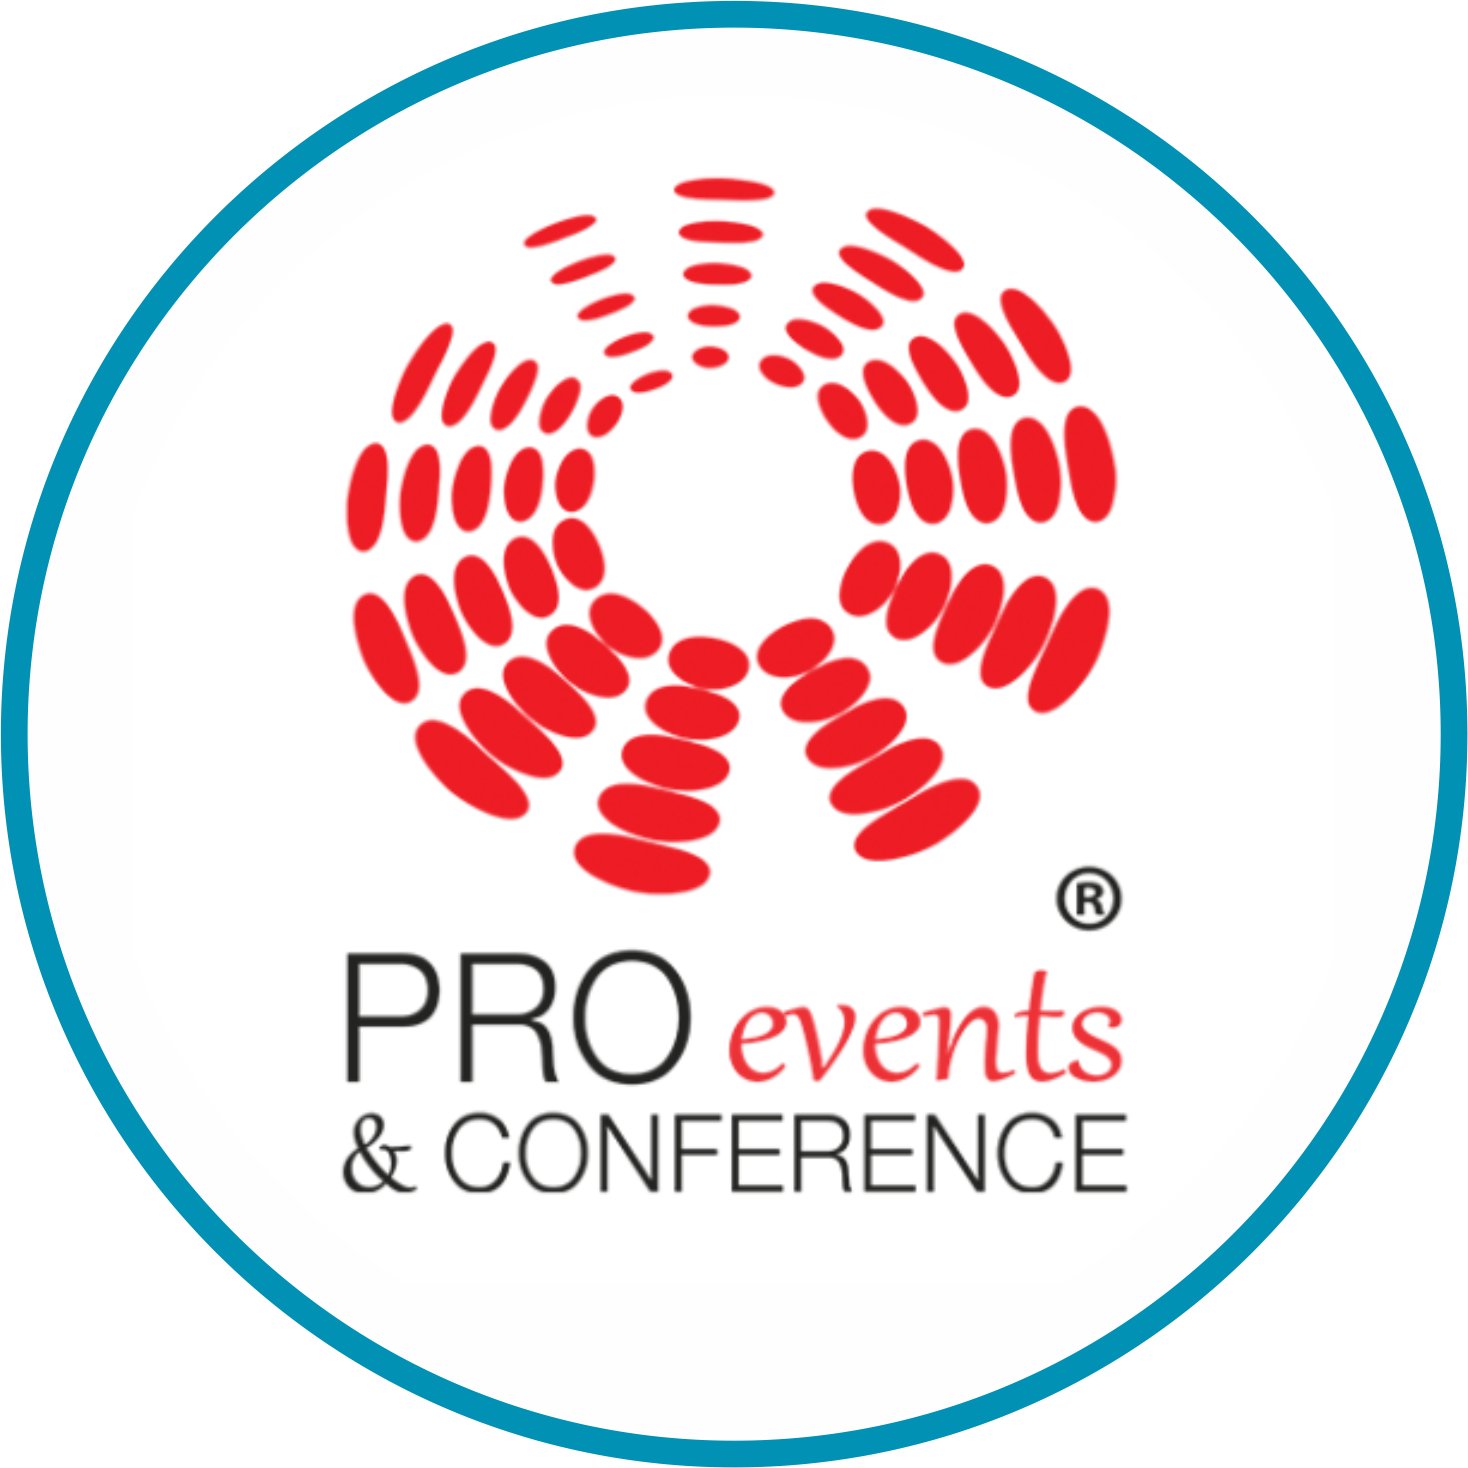 PRO events & Conference